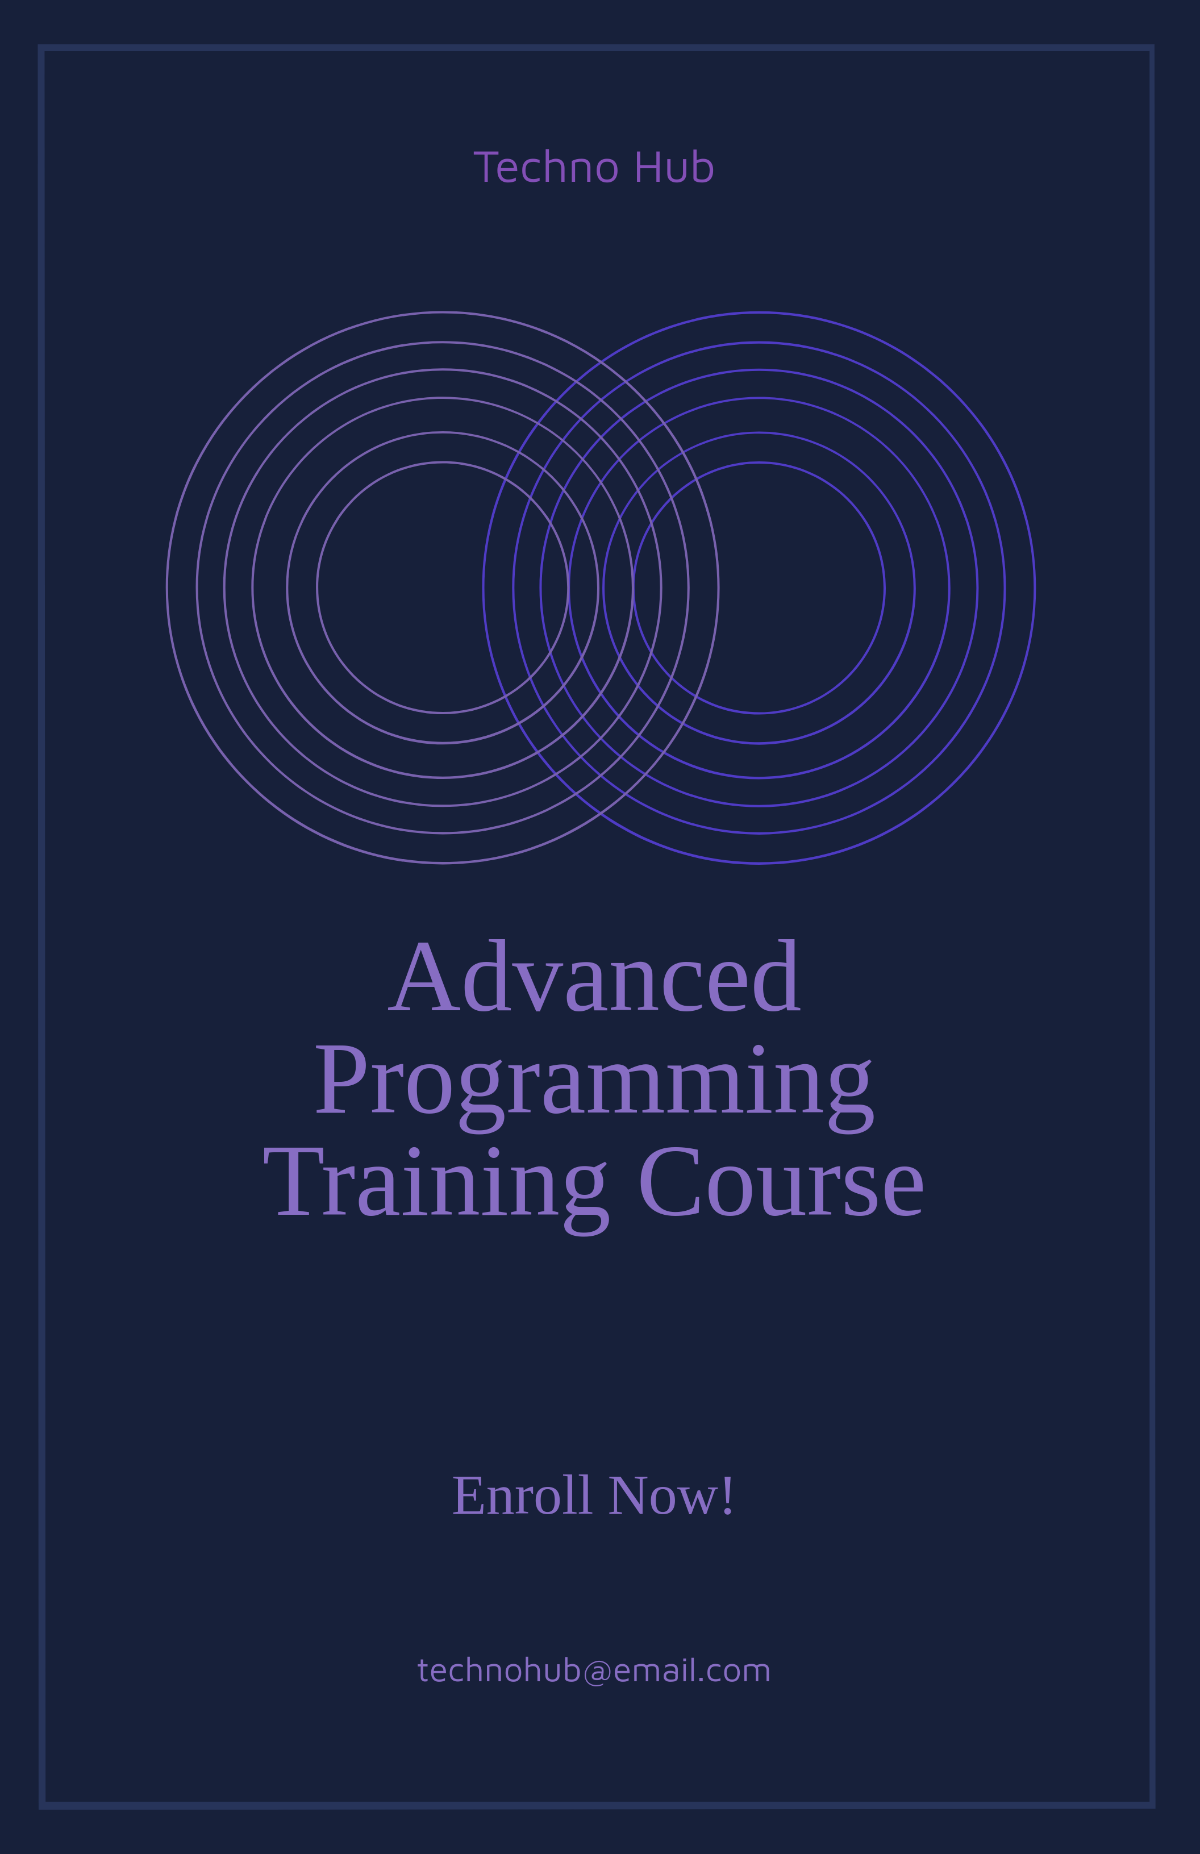 Training Course Poster Template